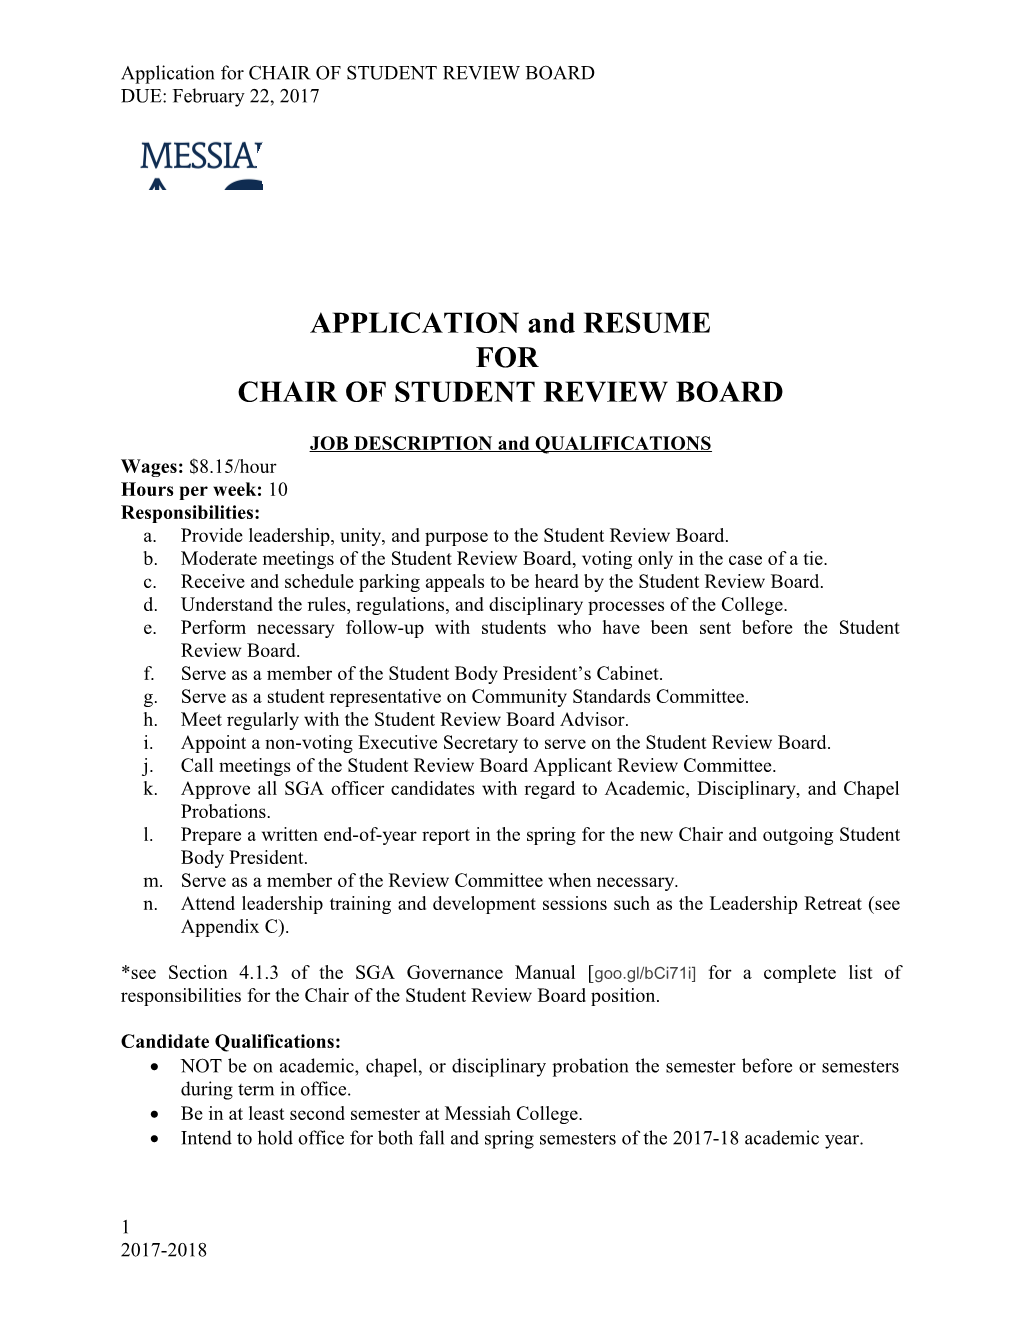 Application for CHAIR of STUDENT REVIEW BOARD